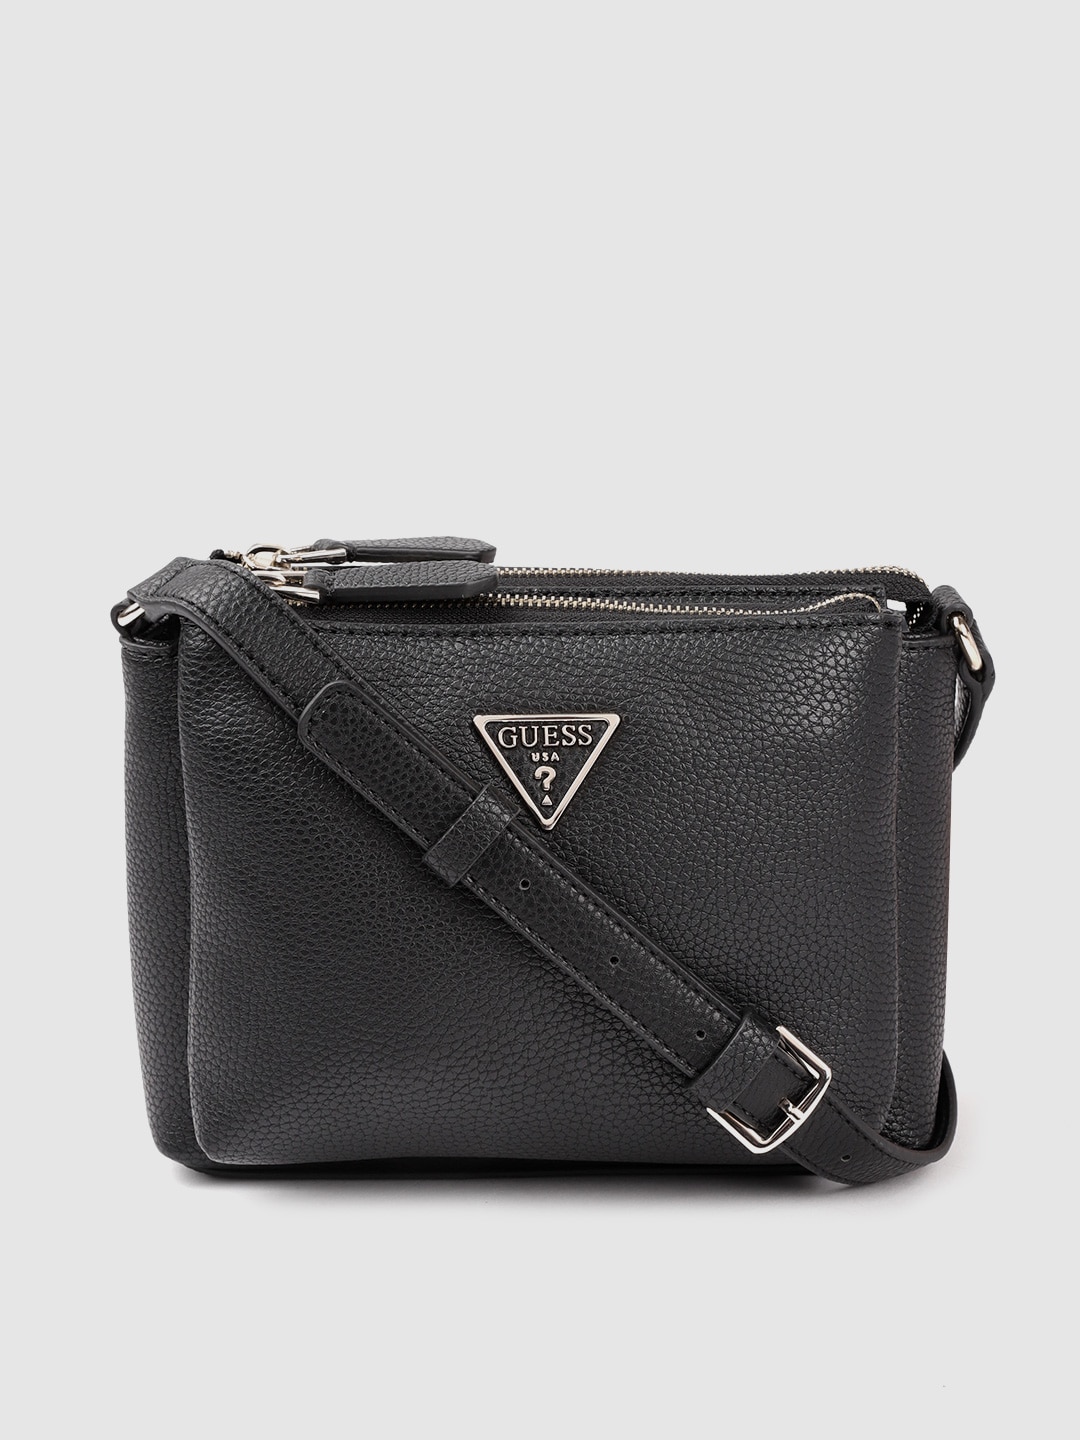 GUESS Black Solid Structured Sling Bag Price in India